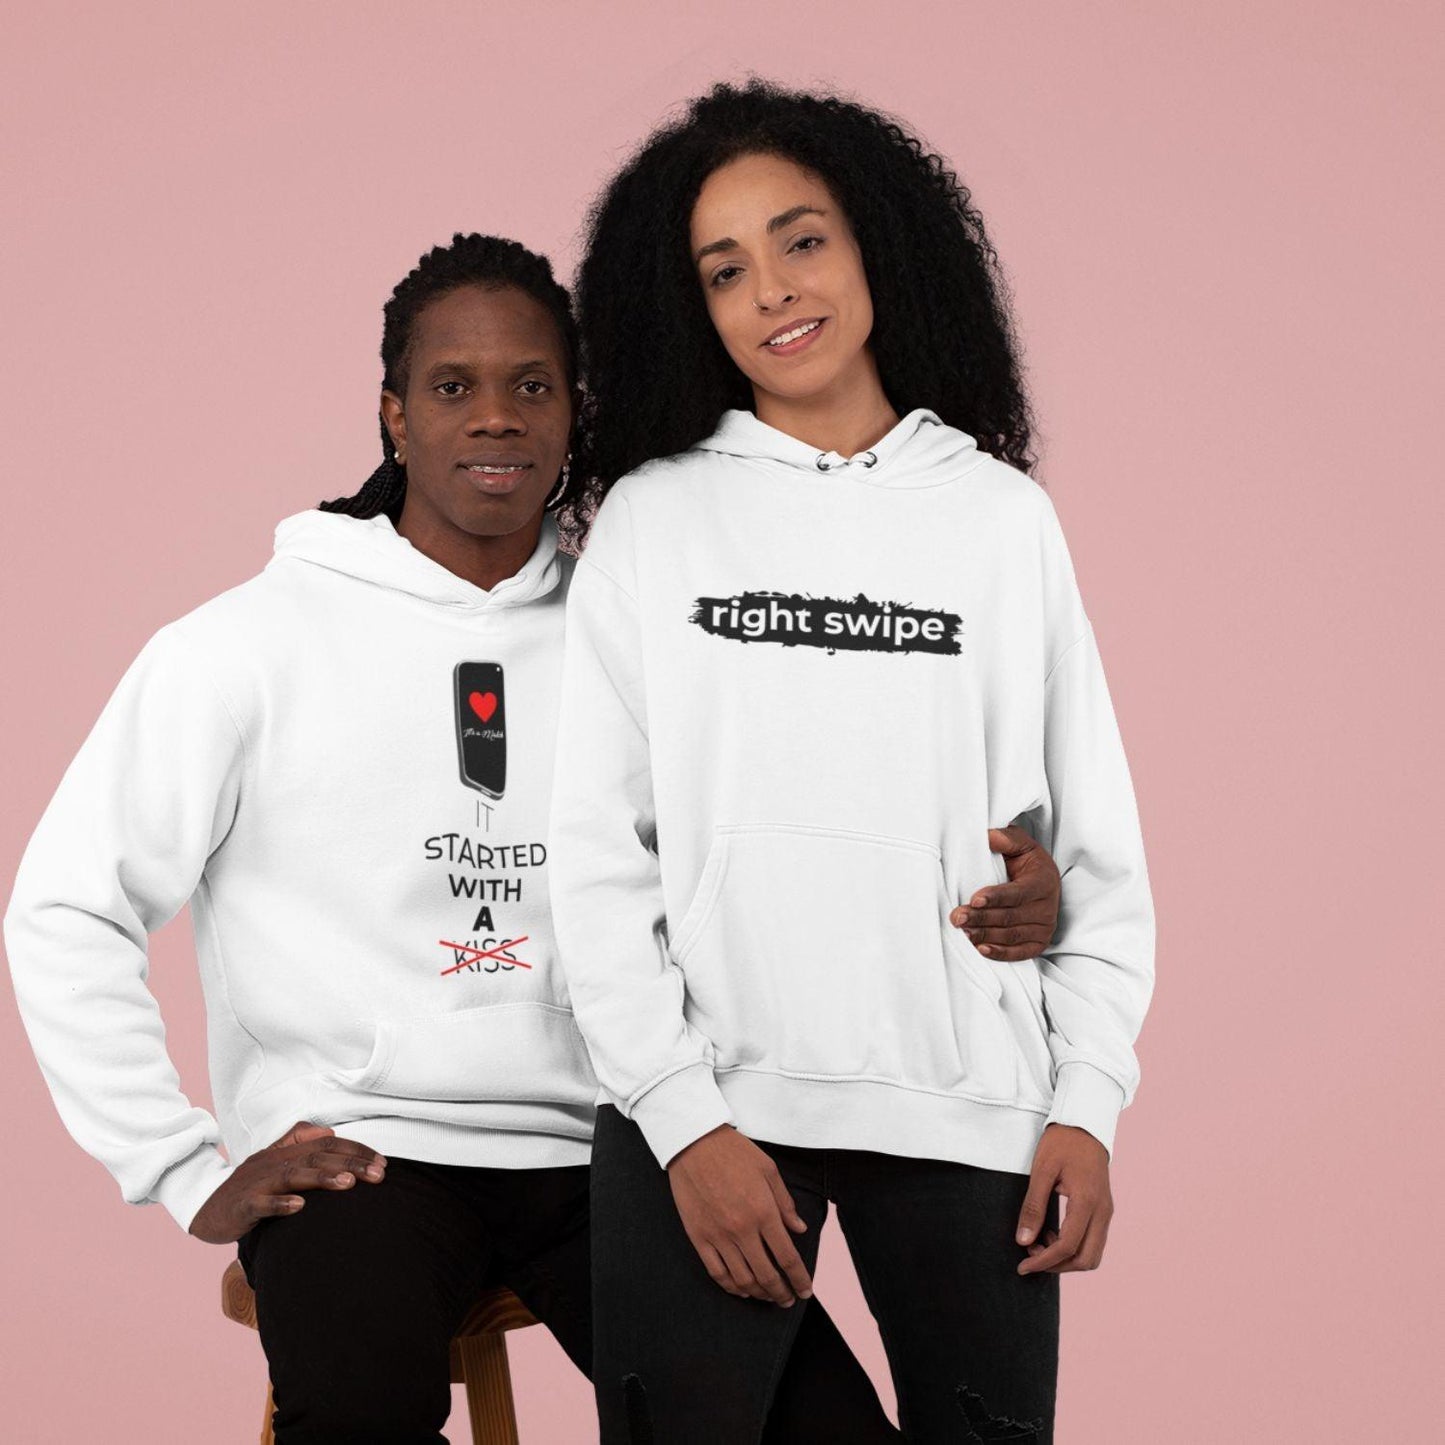 It Started With a Right Swipe: Matching Set for Couples, Valentine's Day Outfits - 4Lovebirds